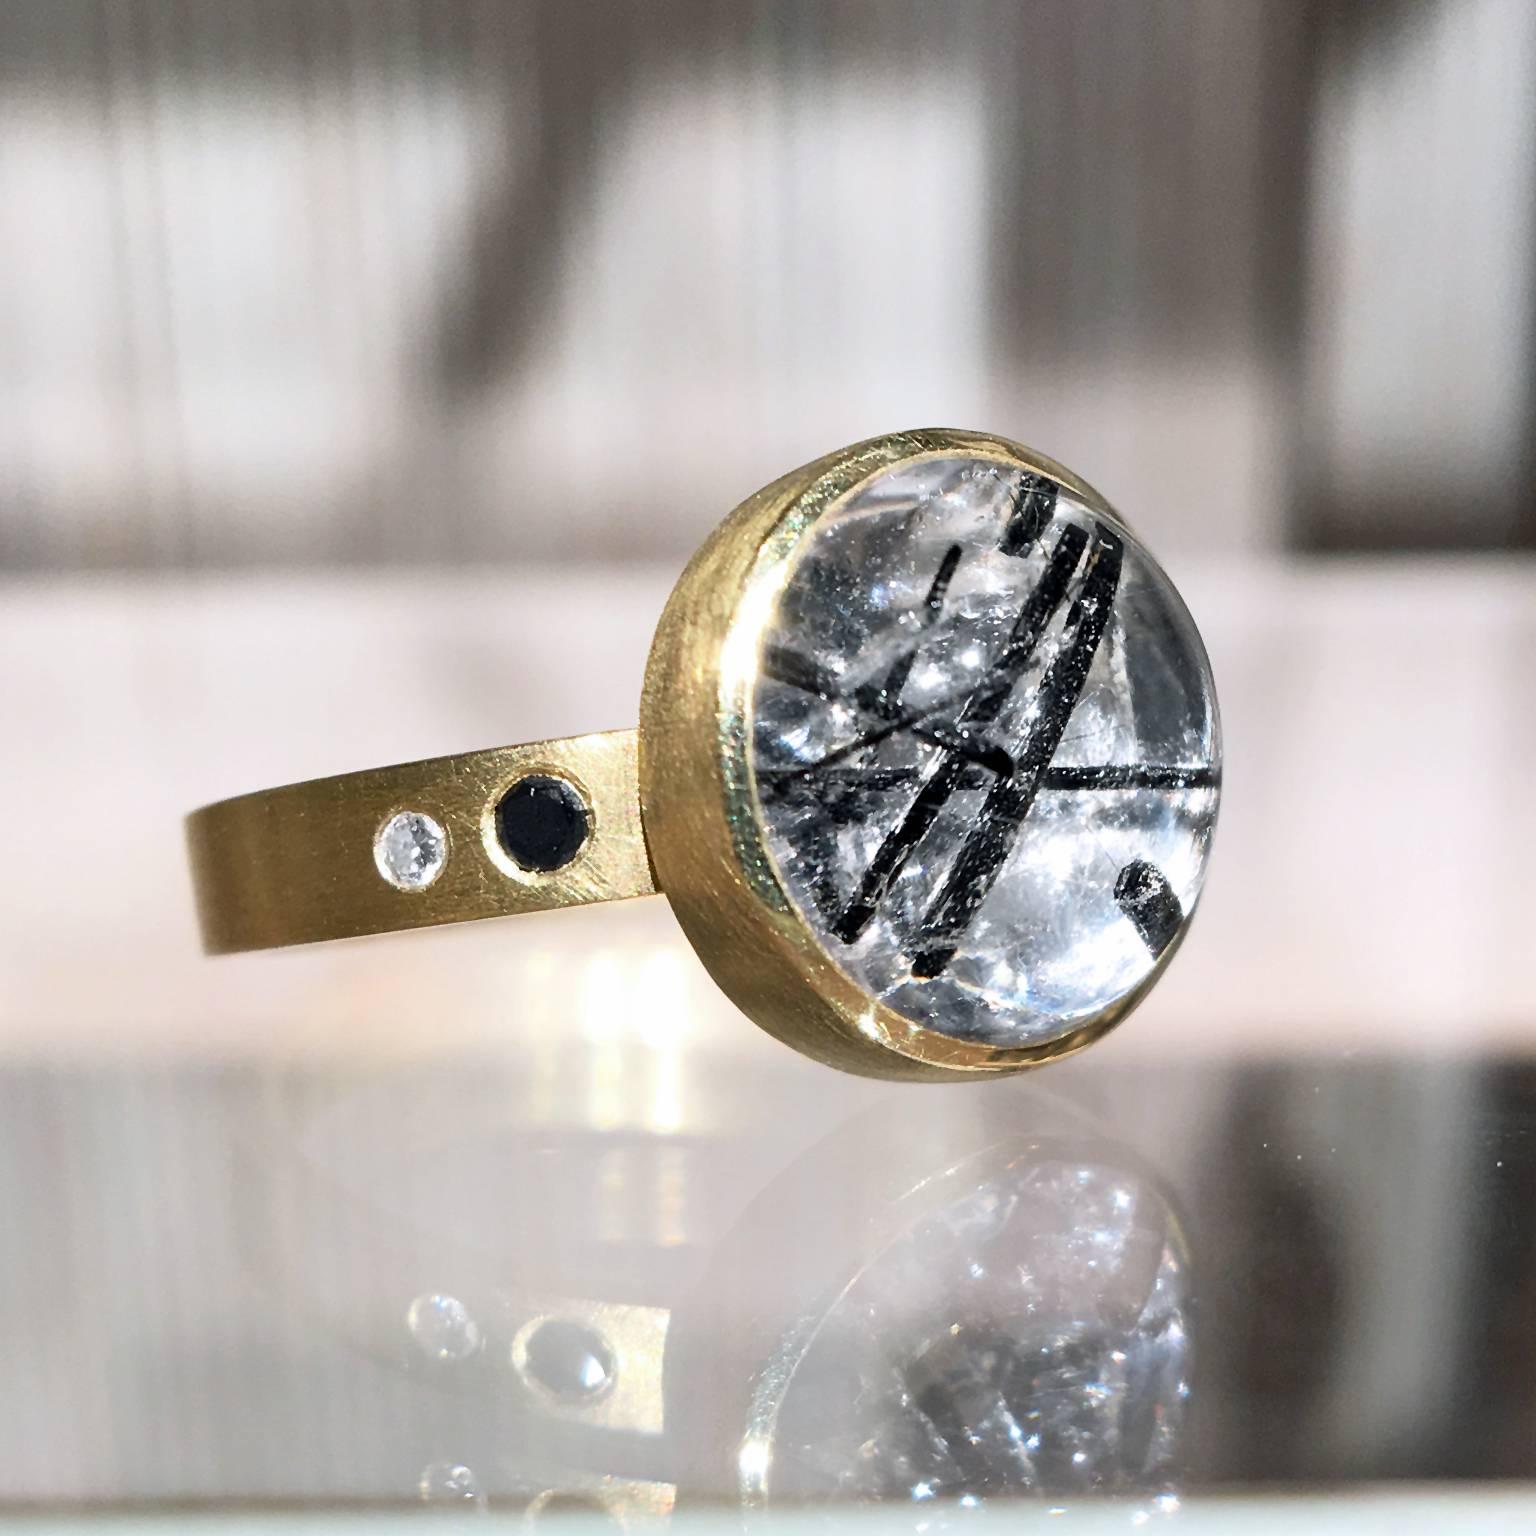 One of a Kind Bubble Ring handcrafted by award winning jewelry artist Robin Waynee in matte-finished 18k yellow gold and high-polished palladium showcasing a beautiful 3.95 carat black tourmalinated quartz with two black diamonds totaling 0.08